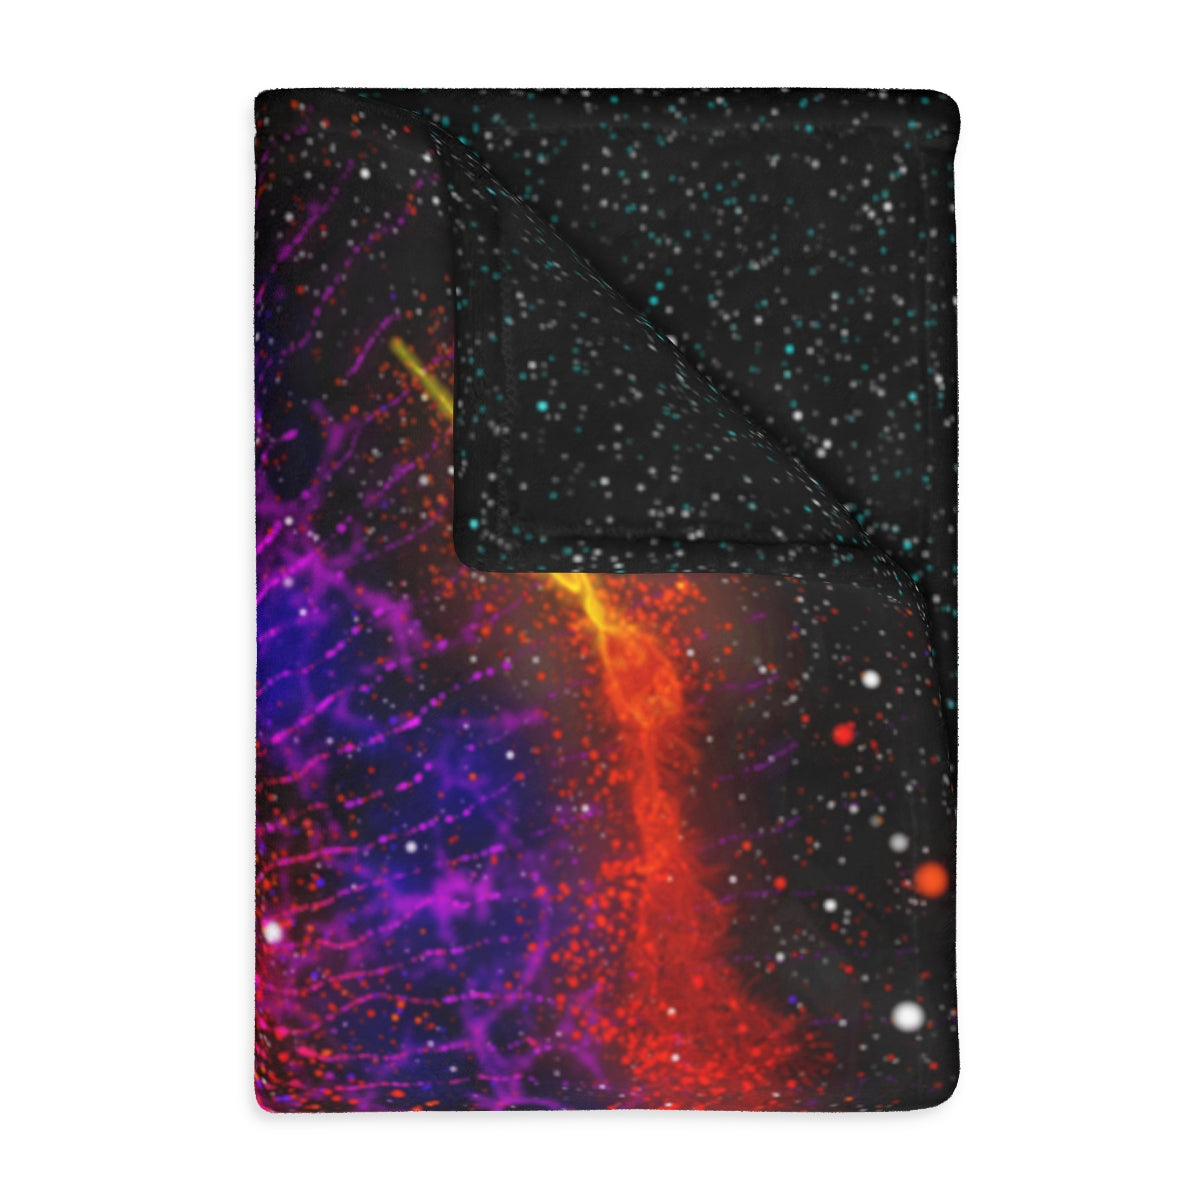 Galactic Duality Blanket - Who R We Collective